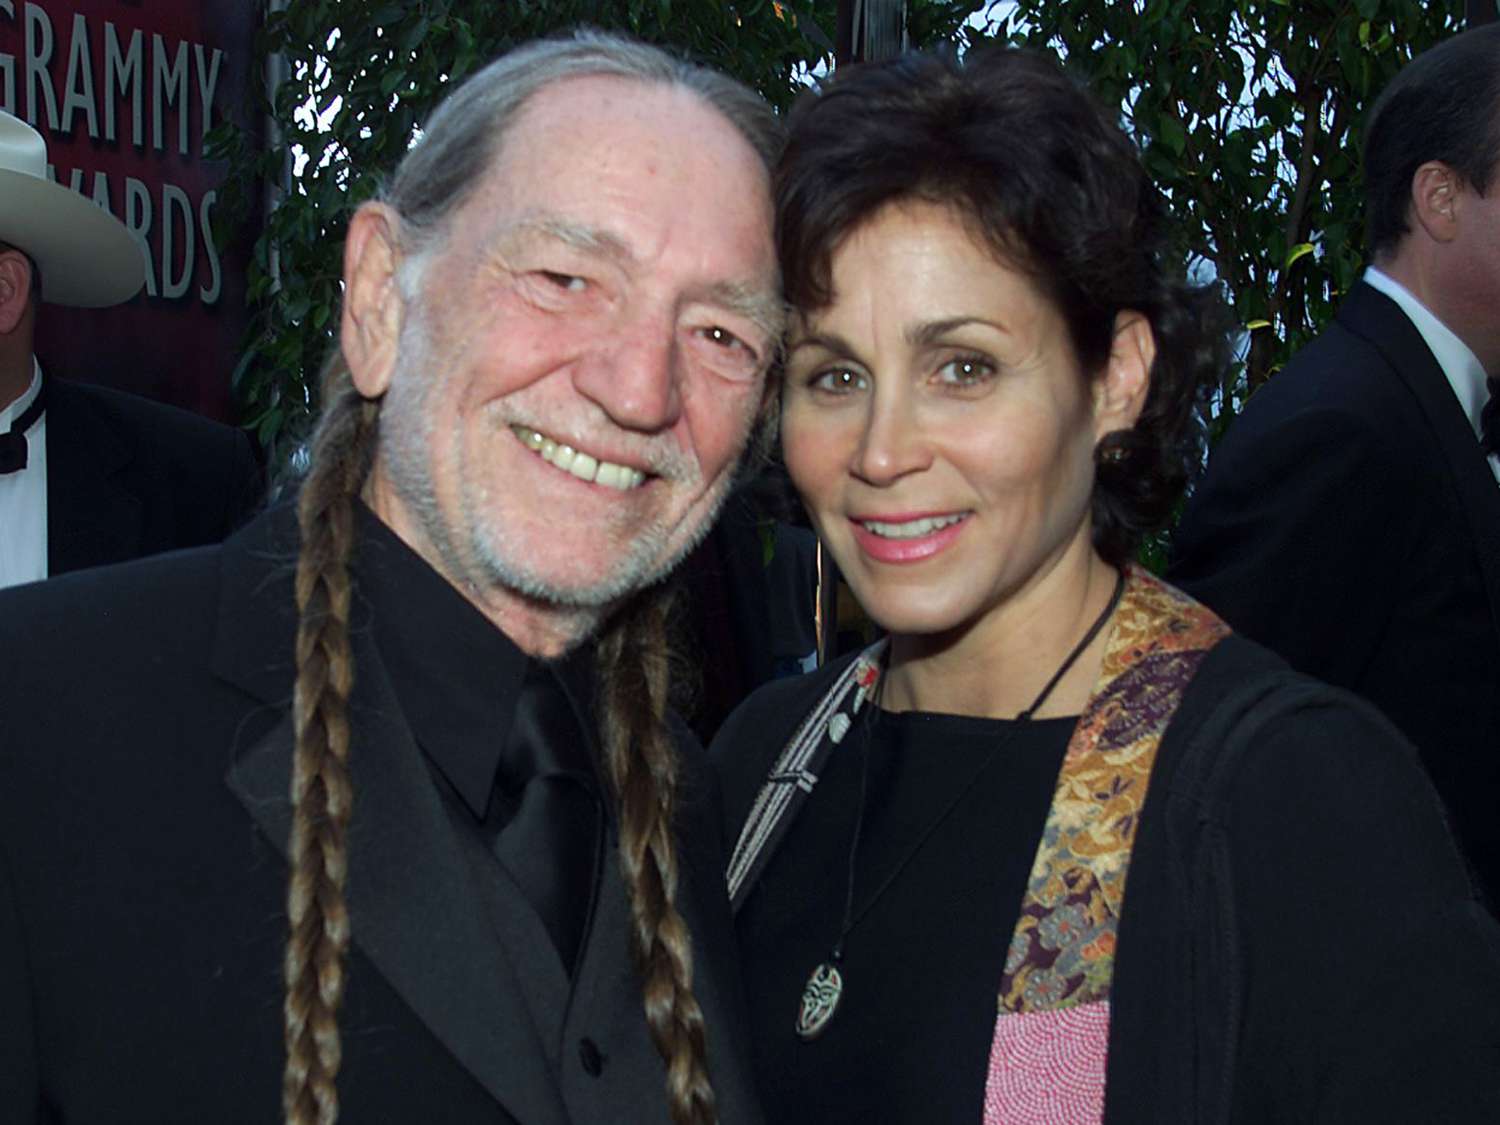 Willie Nelson's Wife, Annie D'Angelo Biography: Spouse, Net Worth, Movies, Children, Age